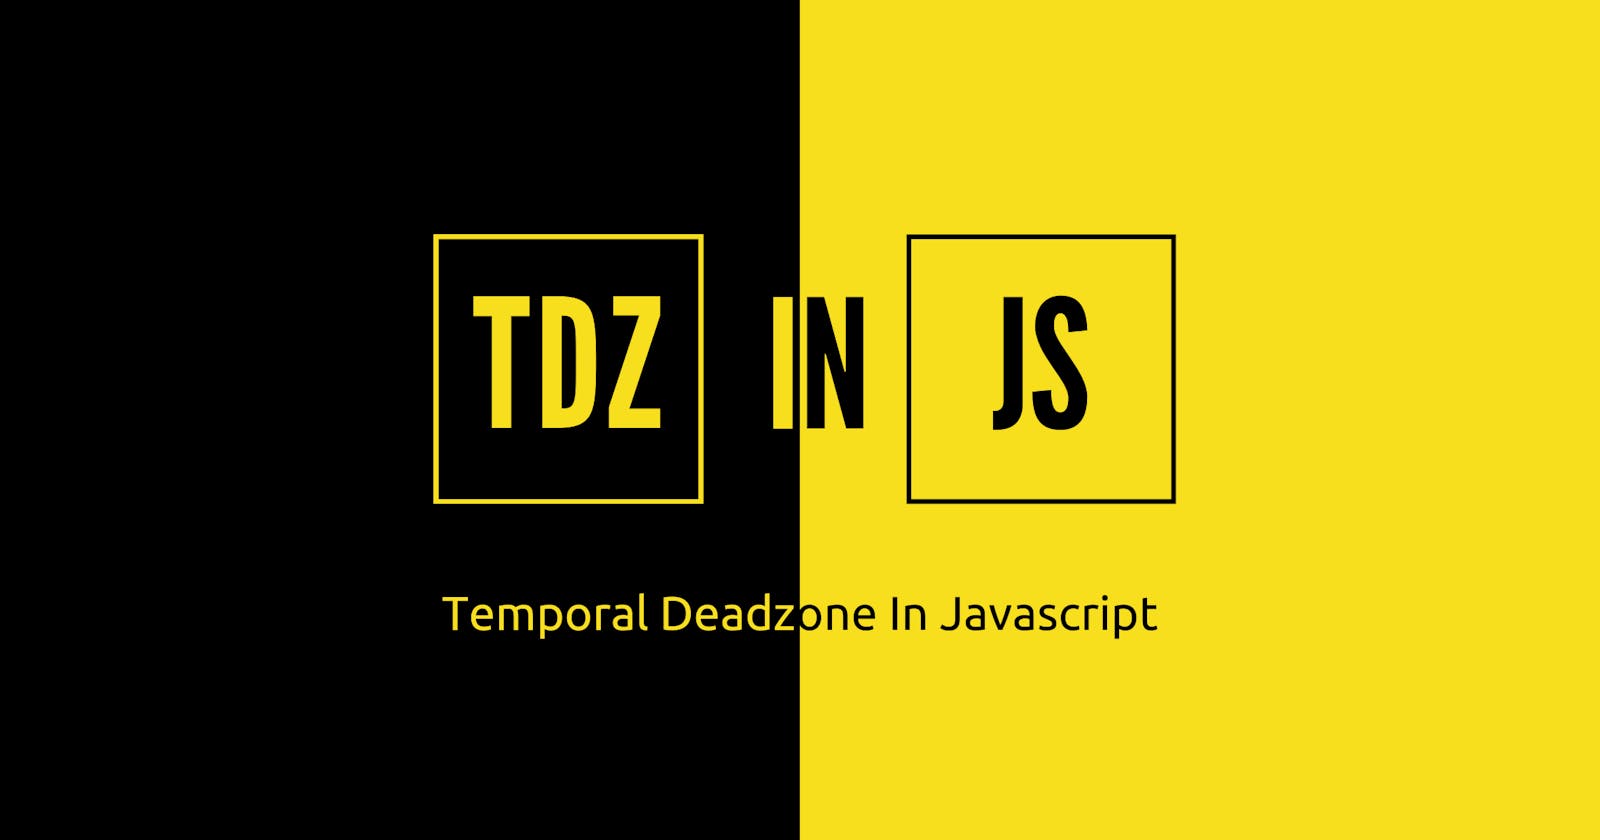 What is Temporal Dead Zone (TDZ) In Javascript